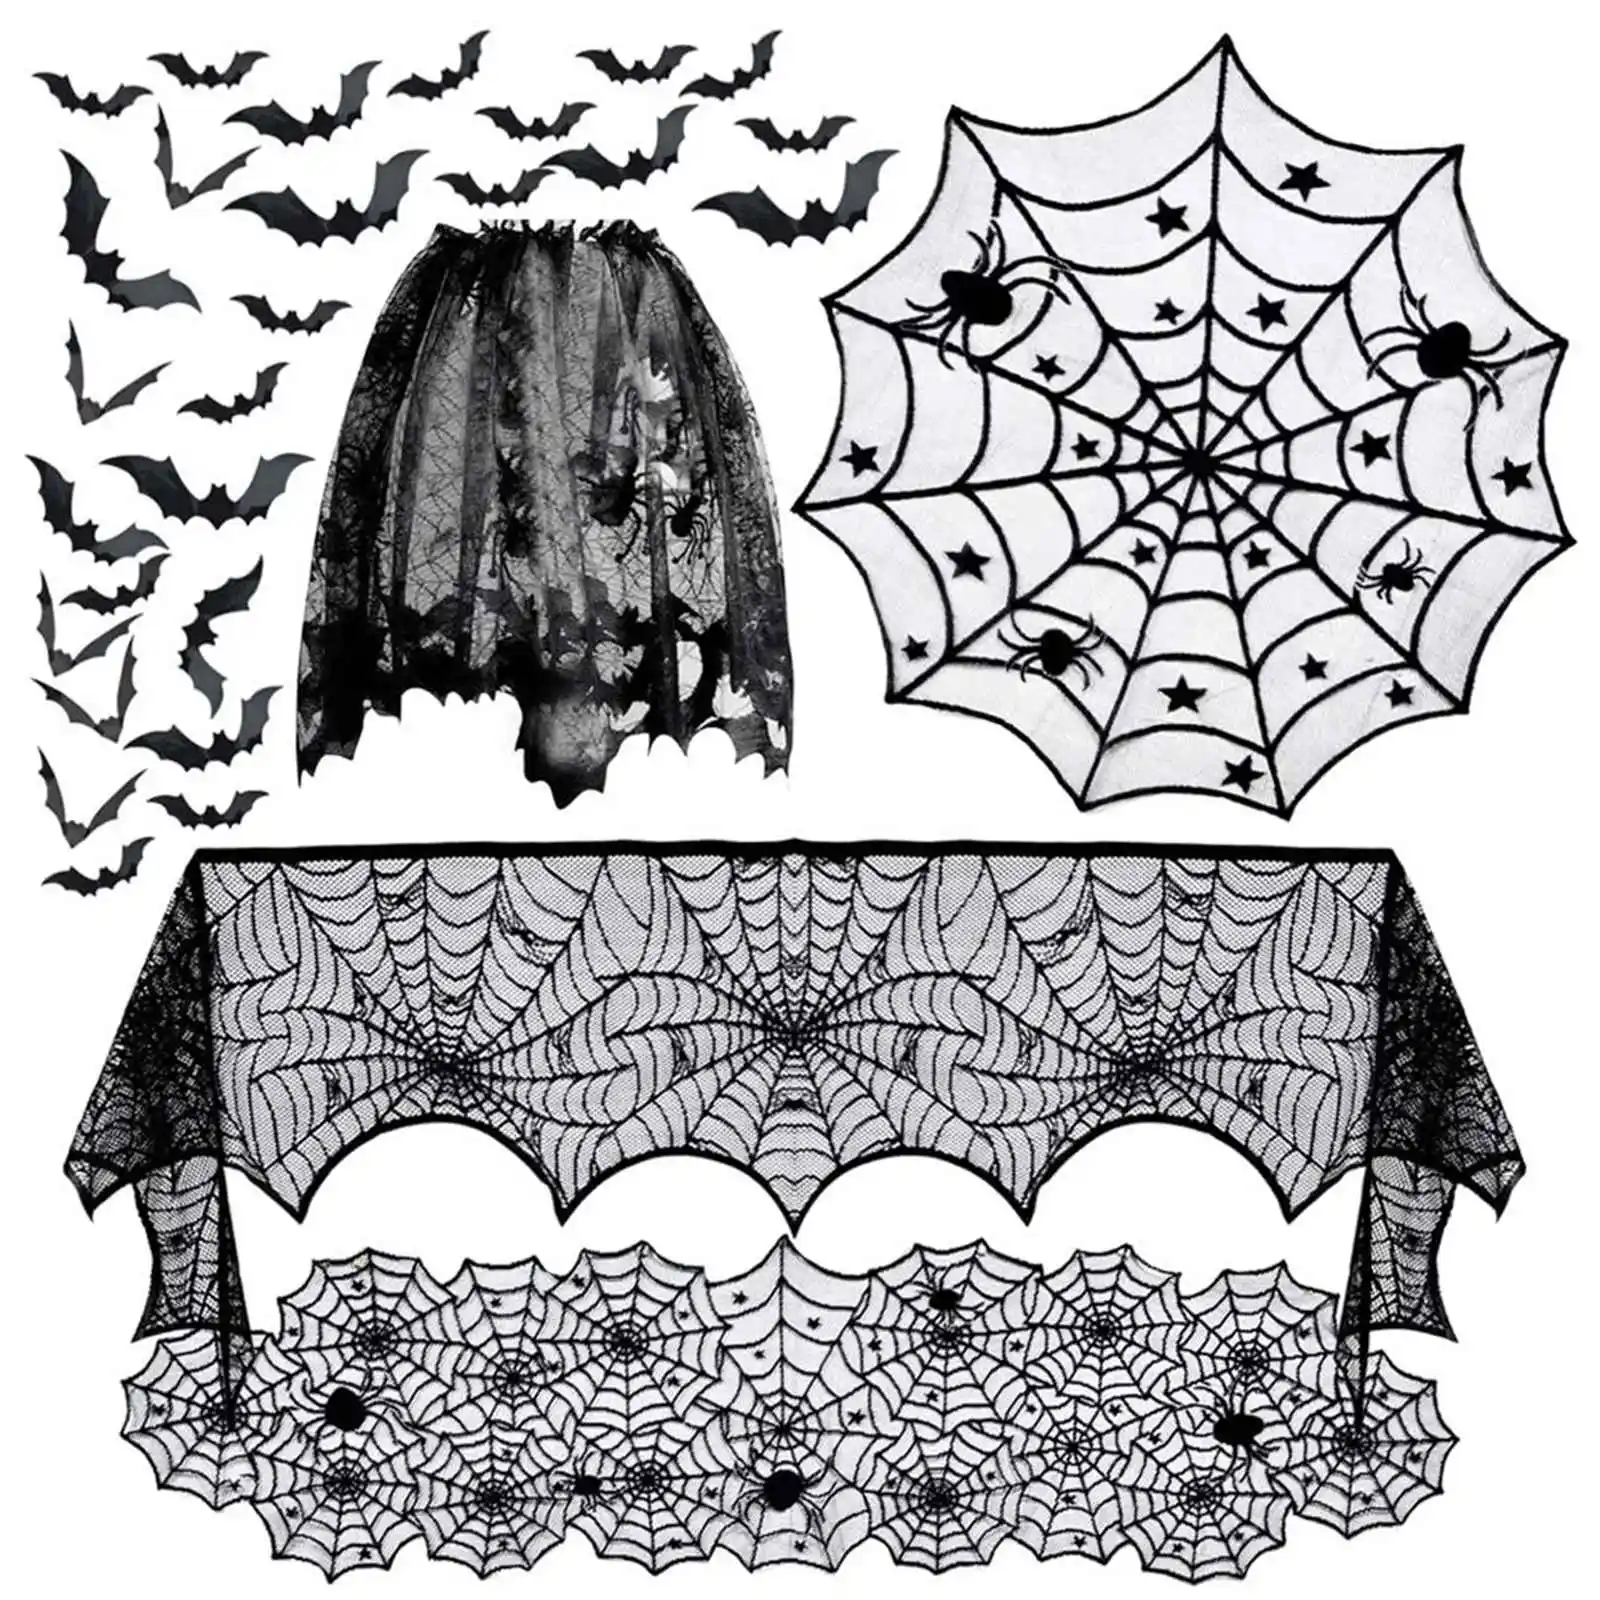 

DIY Black Lace Bat Halloween Props Party Scary Indoor Decorations Window Curtains Event Party Holiday Decorations